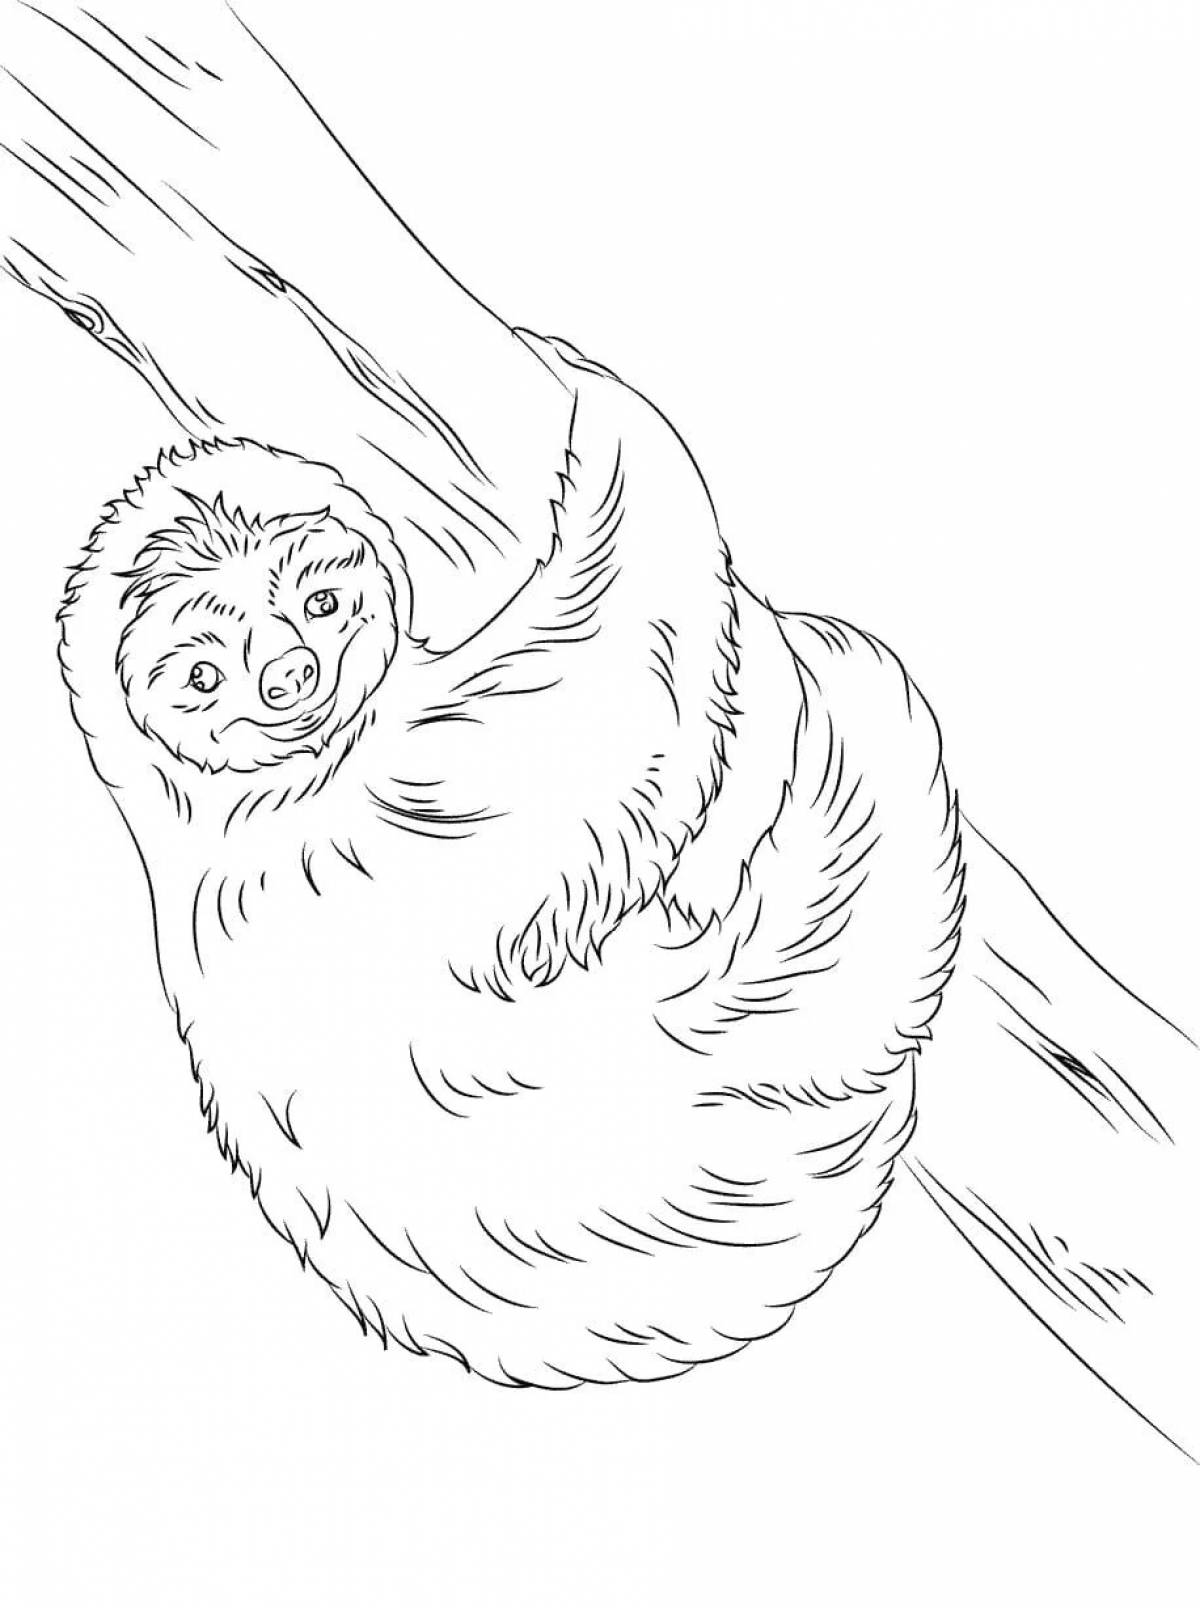 Exciting sloth coloring for kids